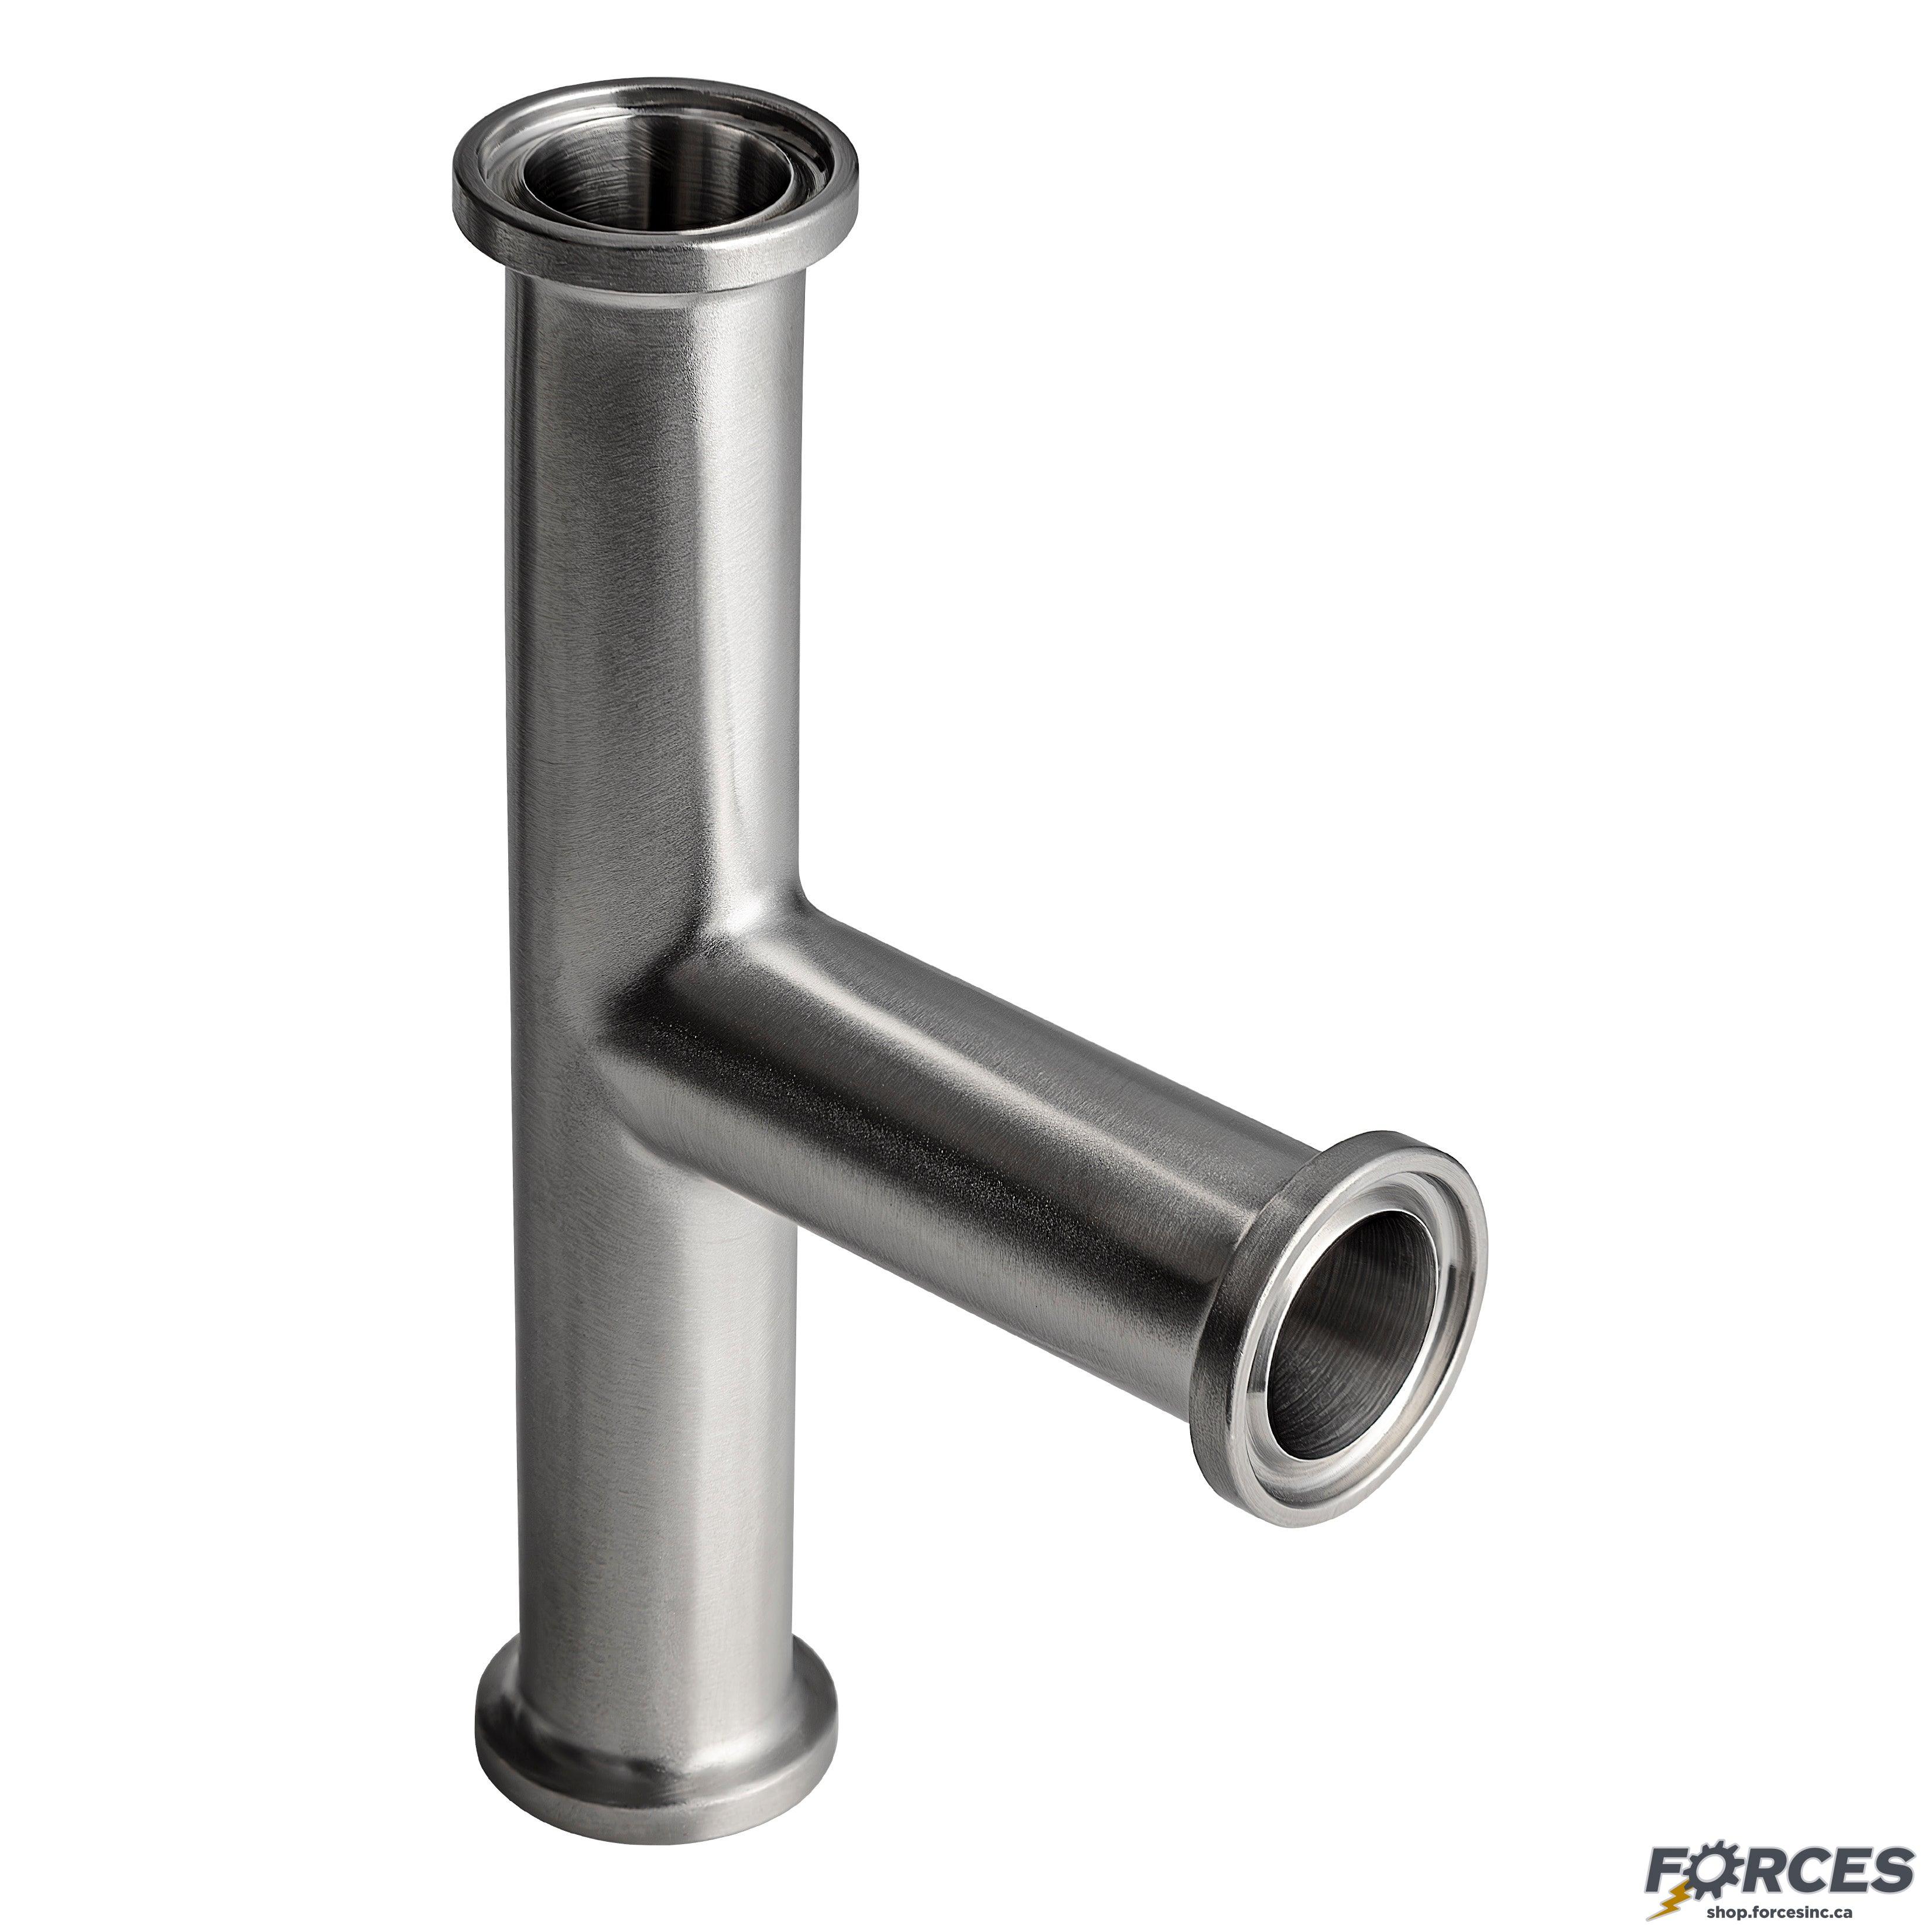 2-1/2" Tri-Clamp Tee - Stainless Steel 316 - Forces Inc